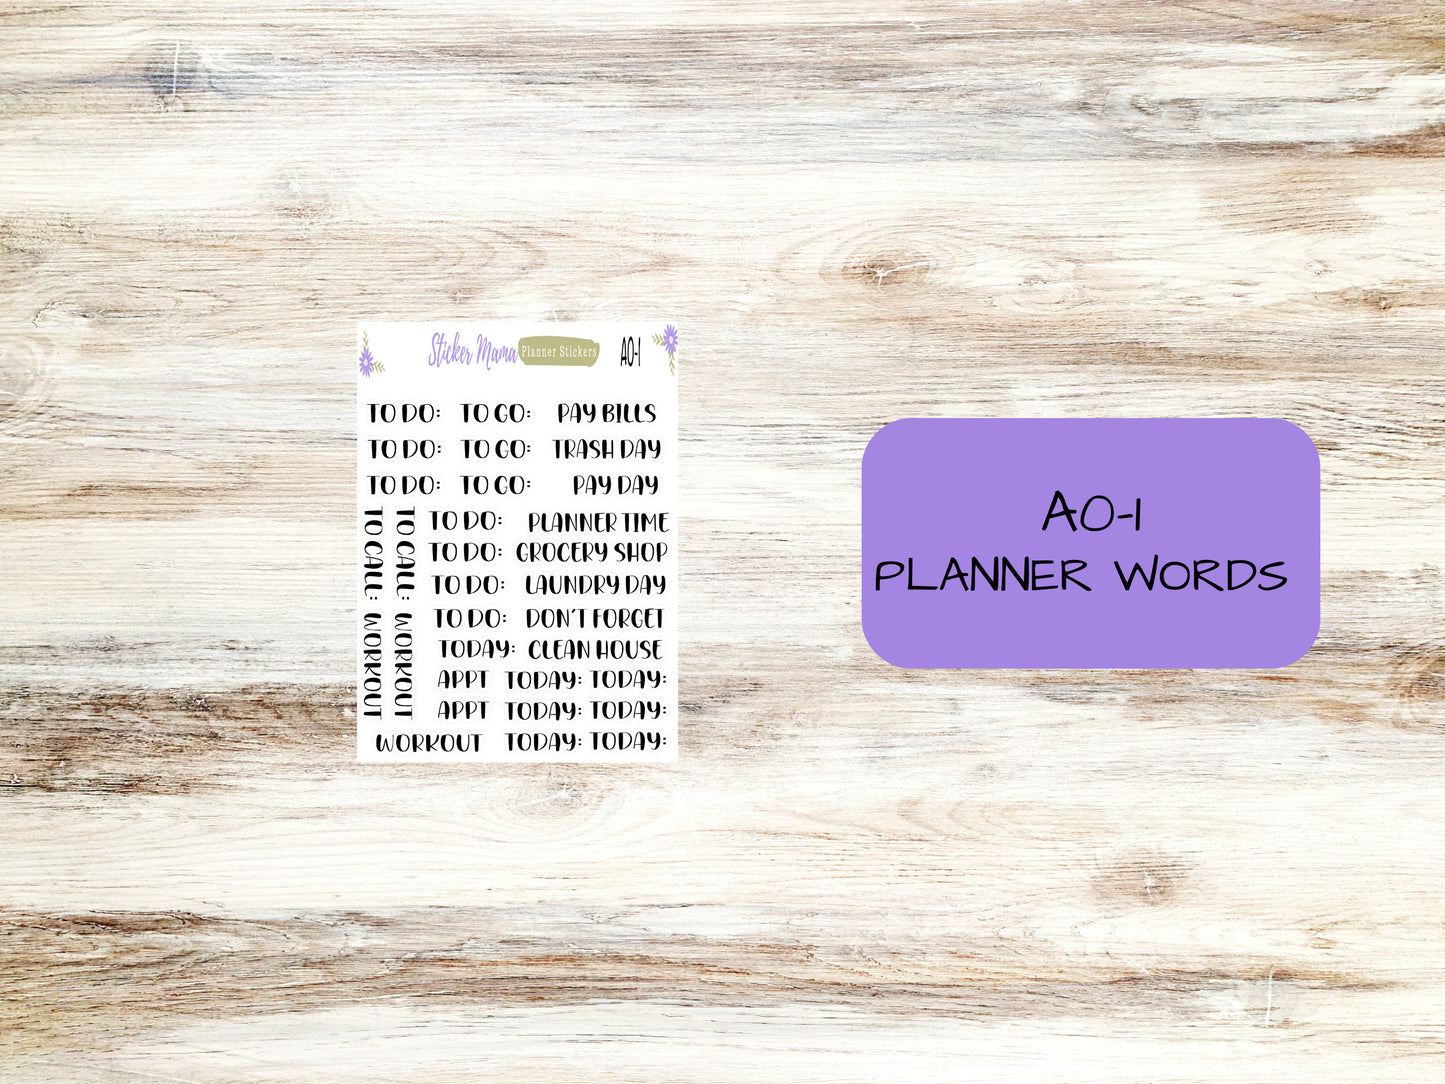 DD3094 - Daily Duo 7x9 || HAPPY NEW Year Planner Stickers - Daily Duo 7x9 Planner - Daily Duo Stickers - Daily Planner